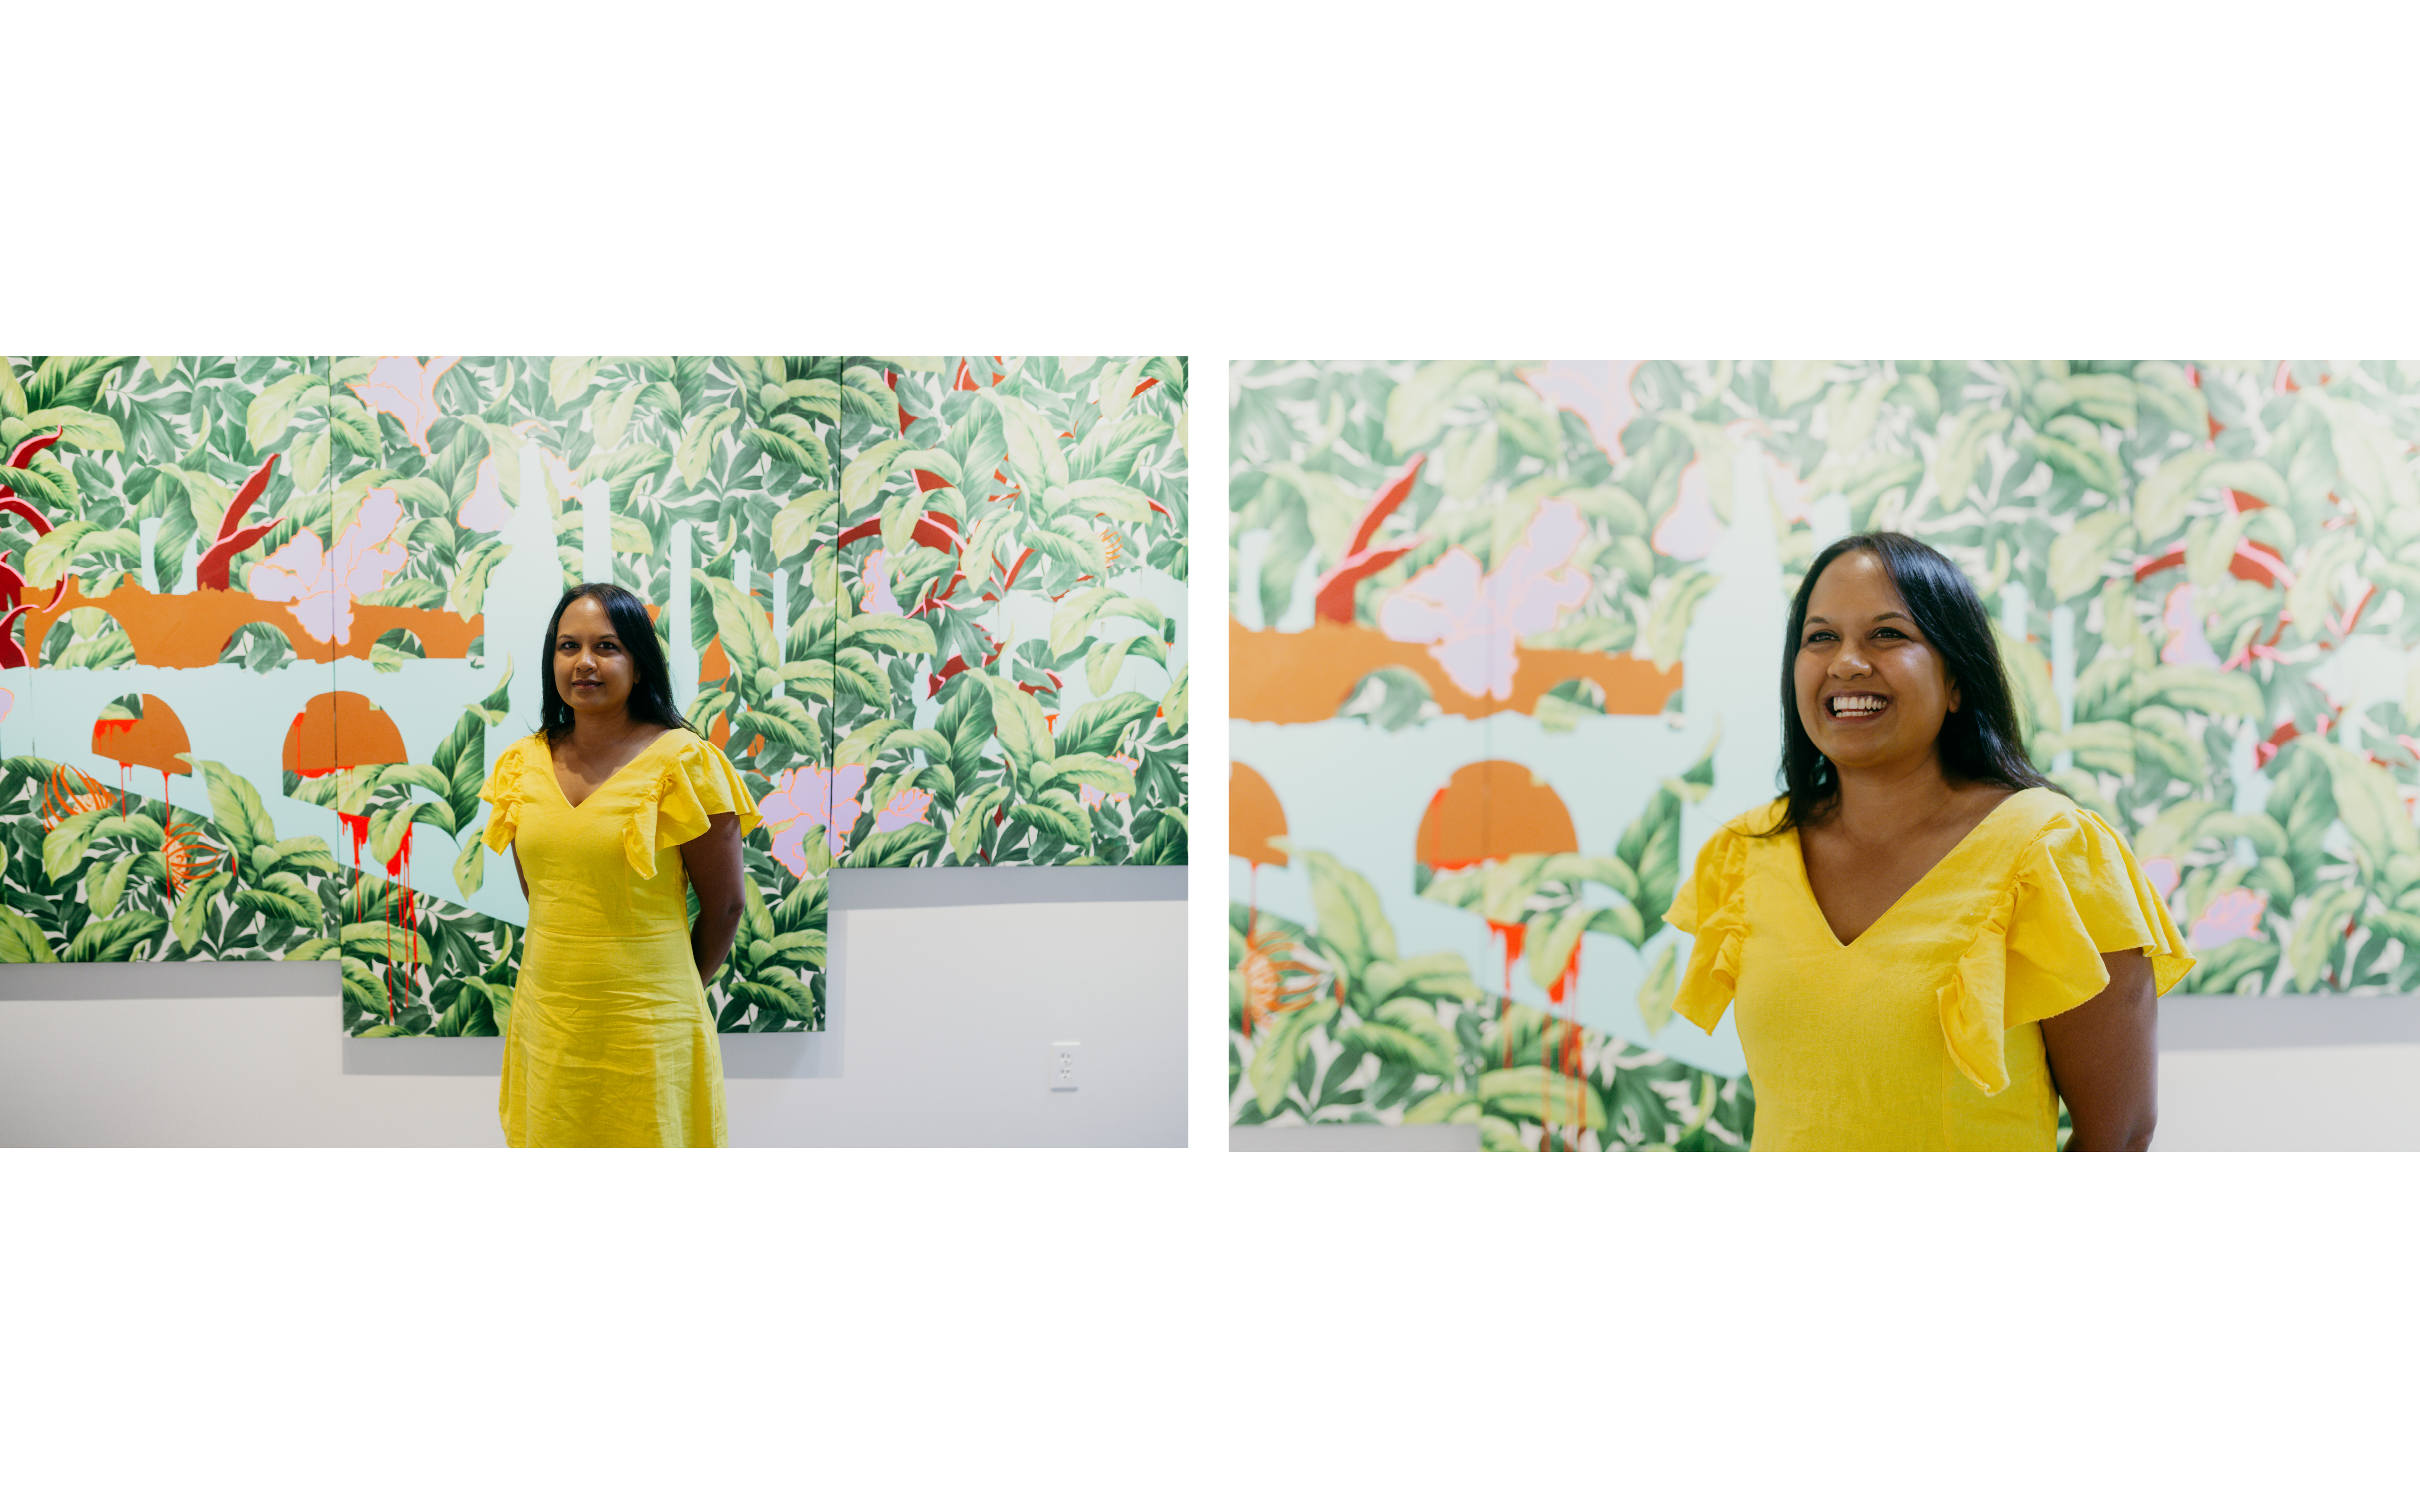 Suchitra poses in front of a large three paneled painting. She is smiling brightly in a yellow dress.